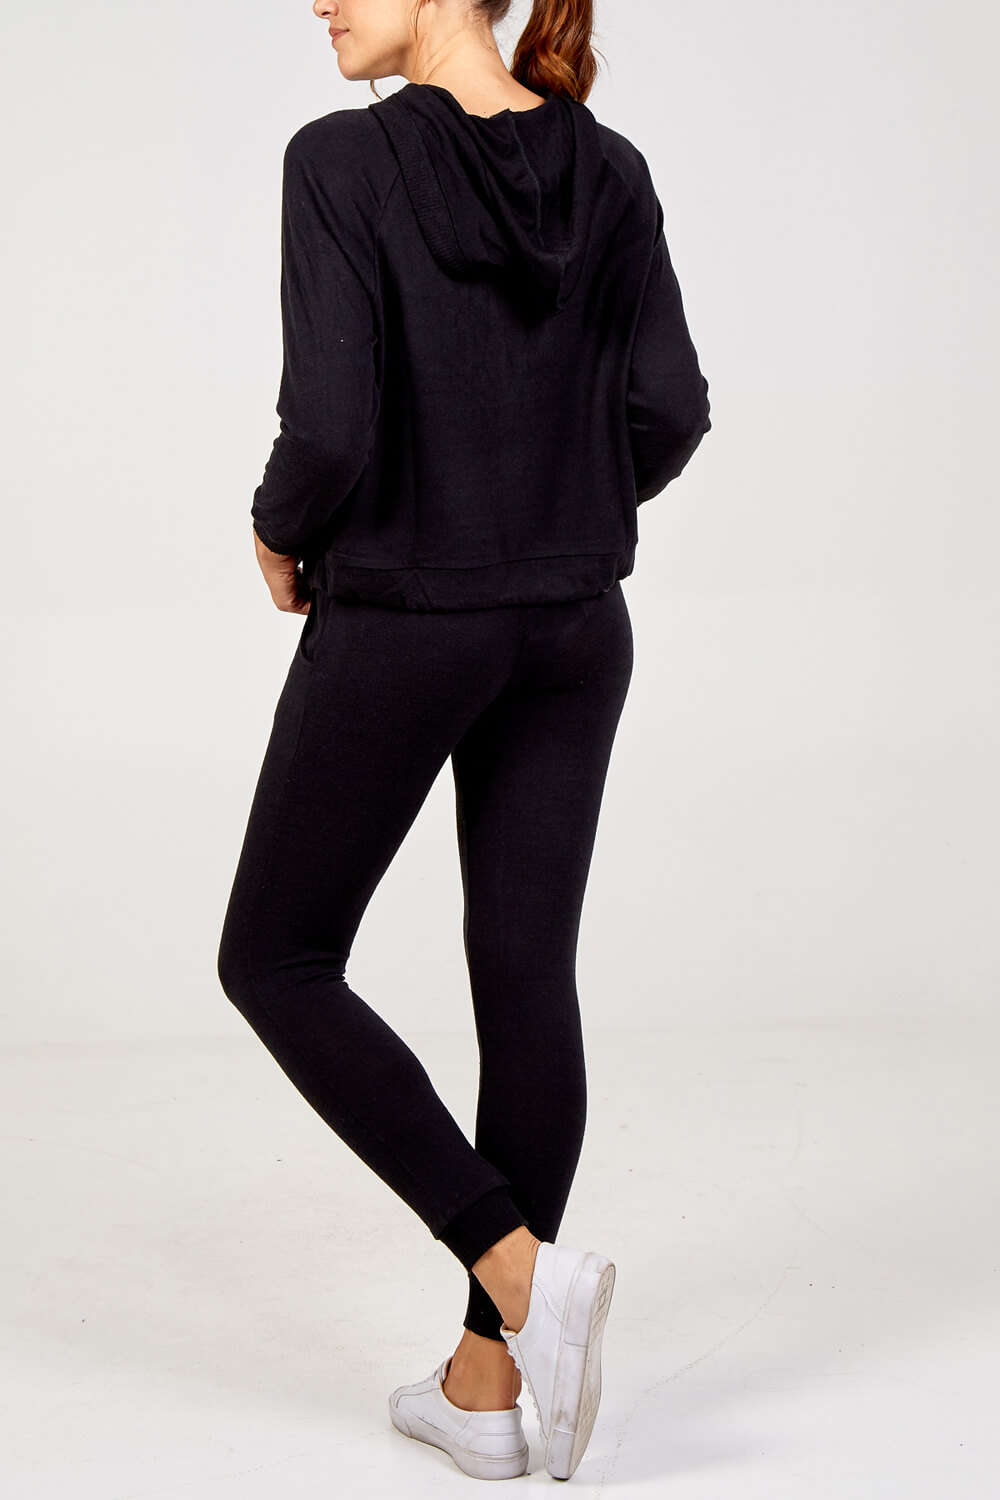 Black Tie Front Hooded Lounge Top, Image 3 of 3